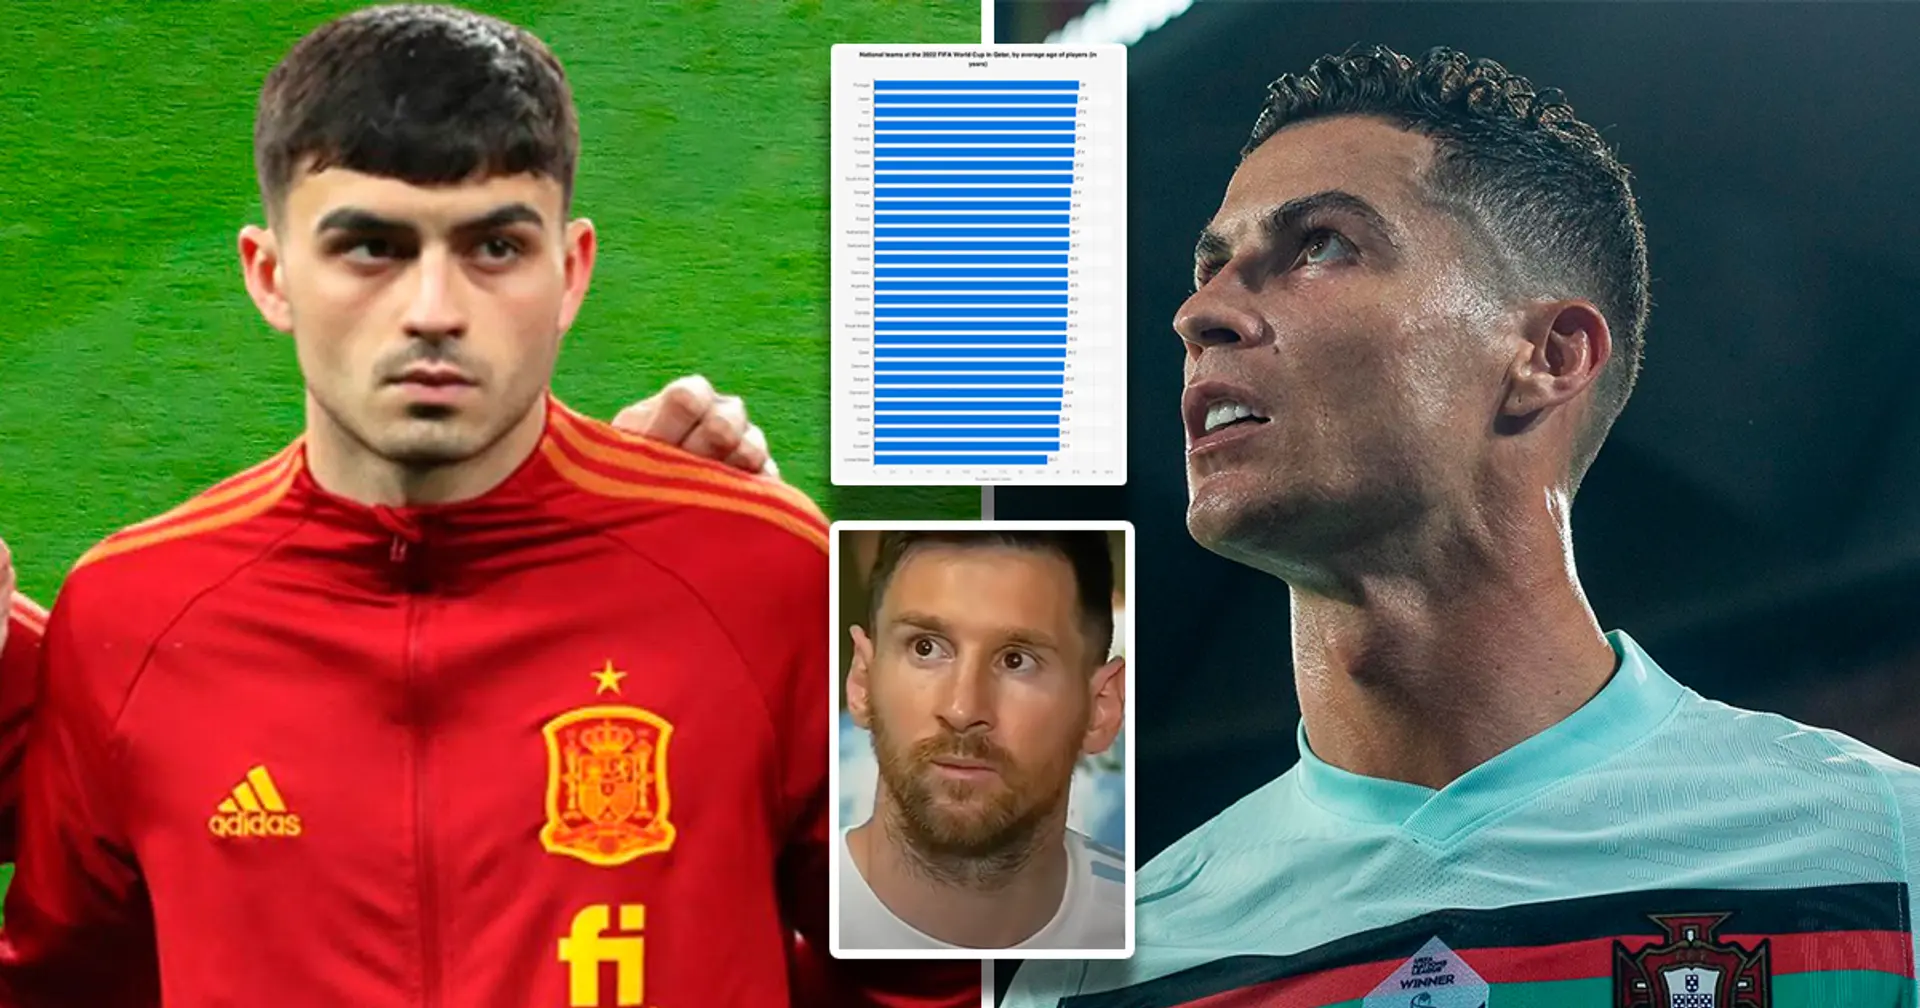 World Cup 2022 squads ranked by average age: Spain, England among youngest teams